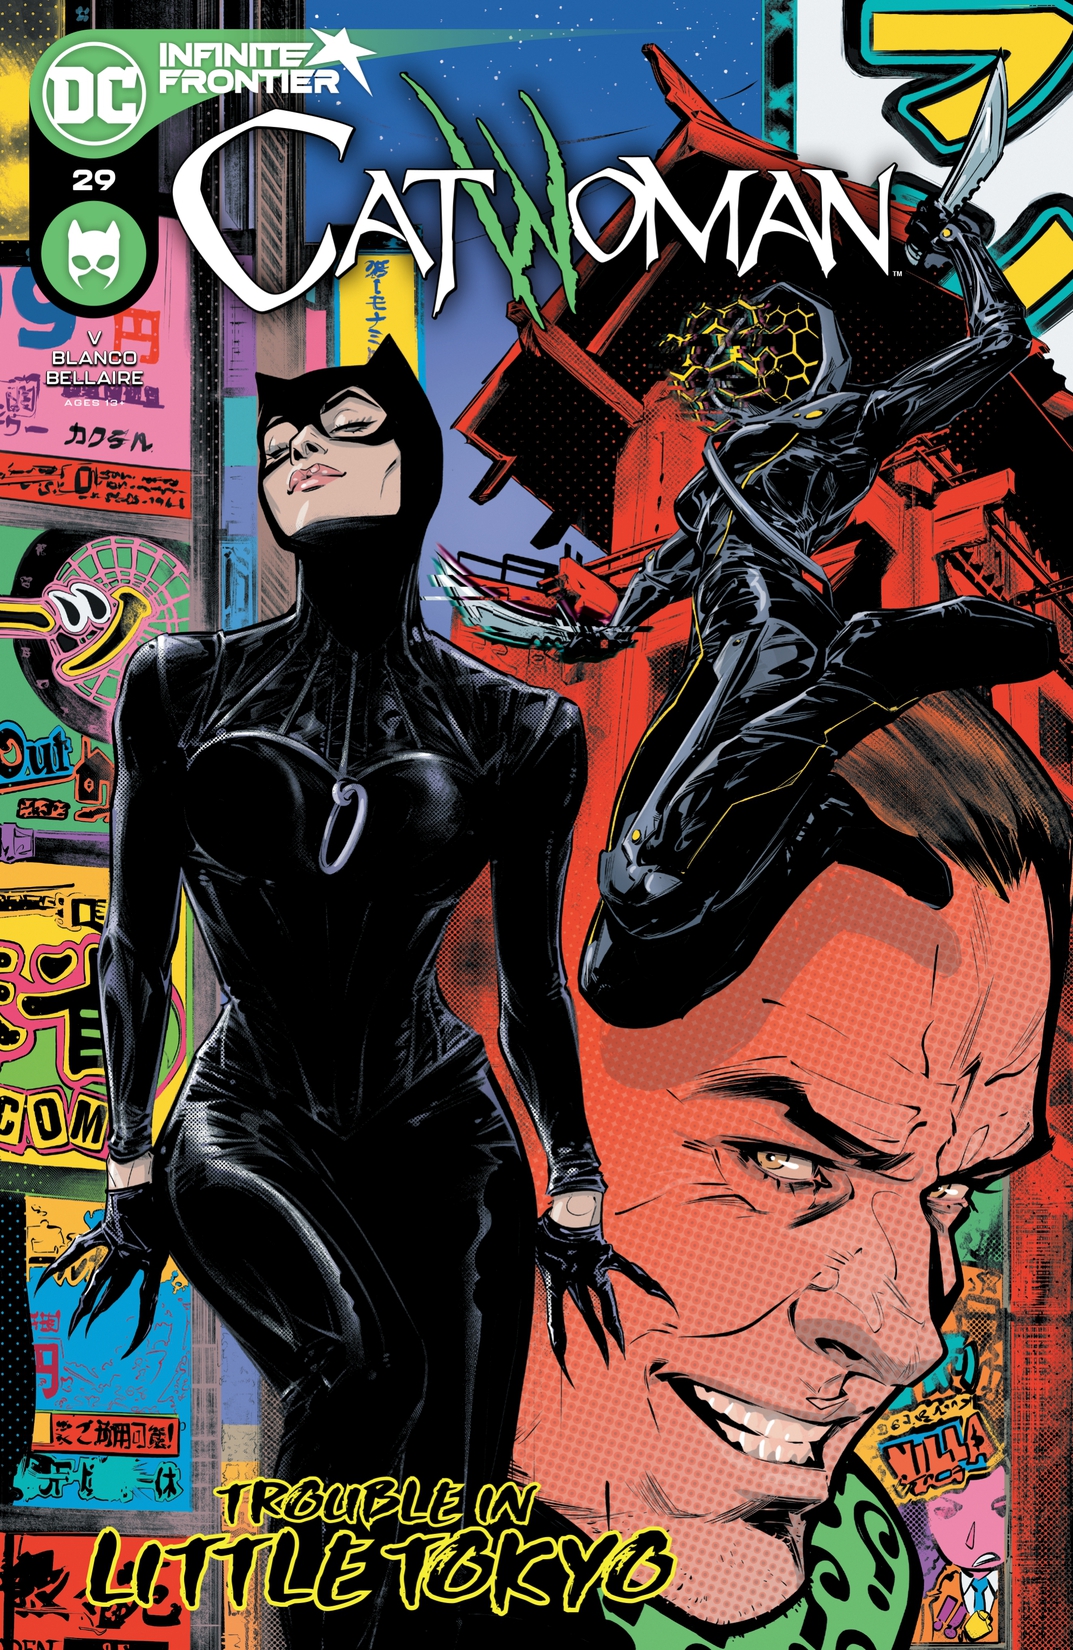 Catwoman (2018-) #29 preview images